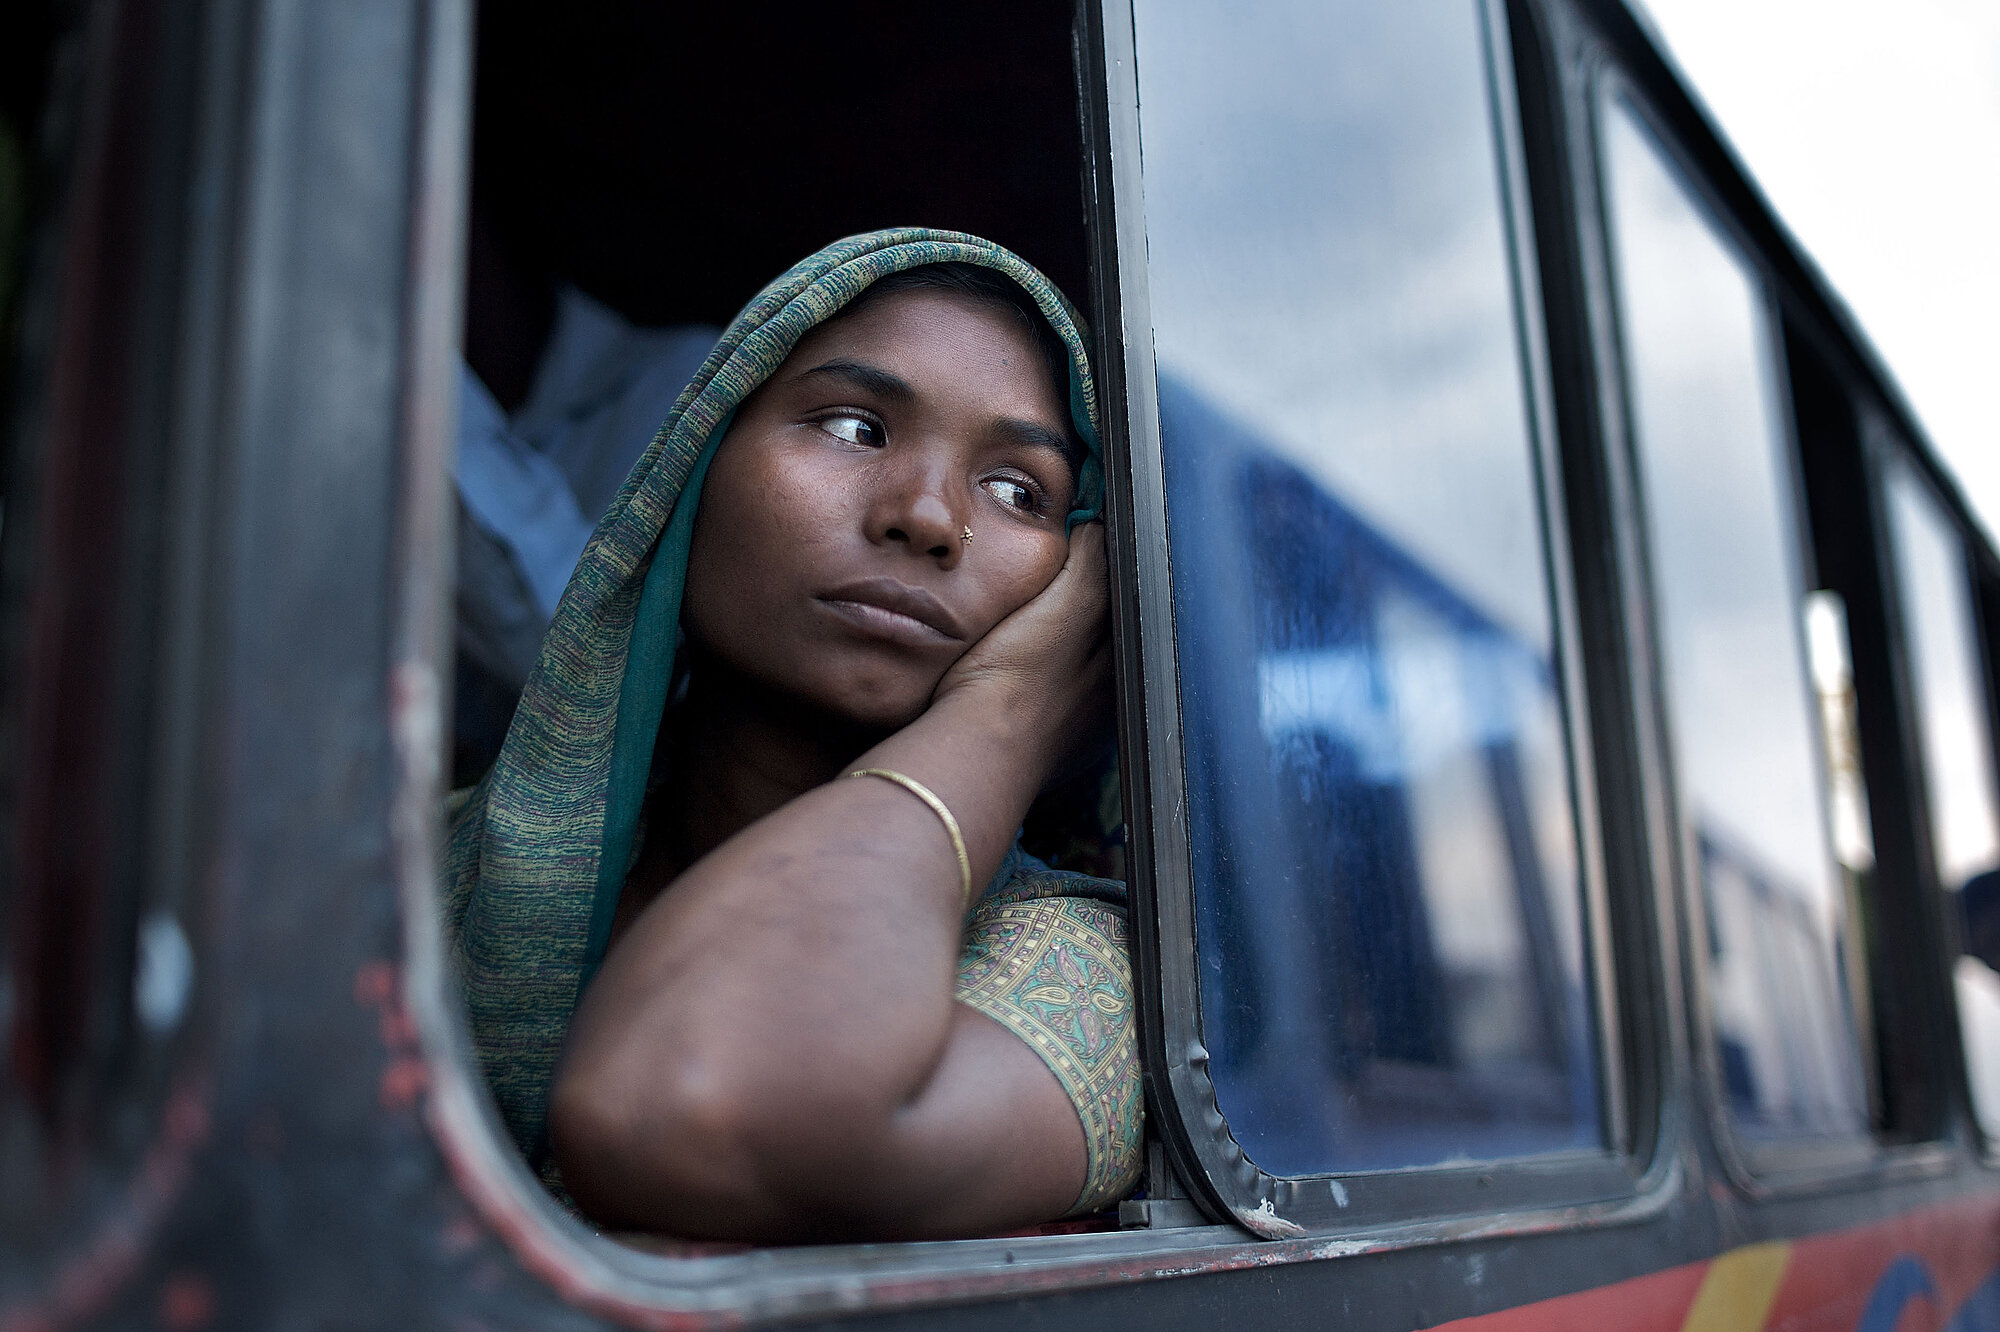  A bus passenger waits for the vehicle she is travelling on to board a ferry in southern Bangladesh.Photo: David White, 16 September 2009 